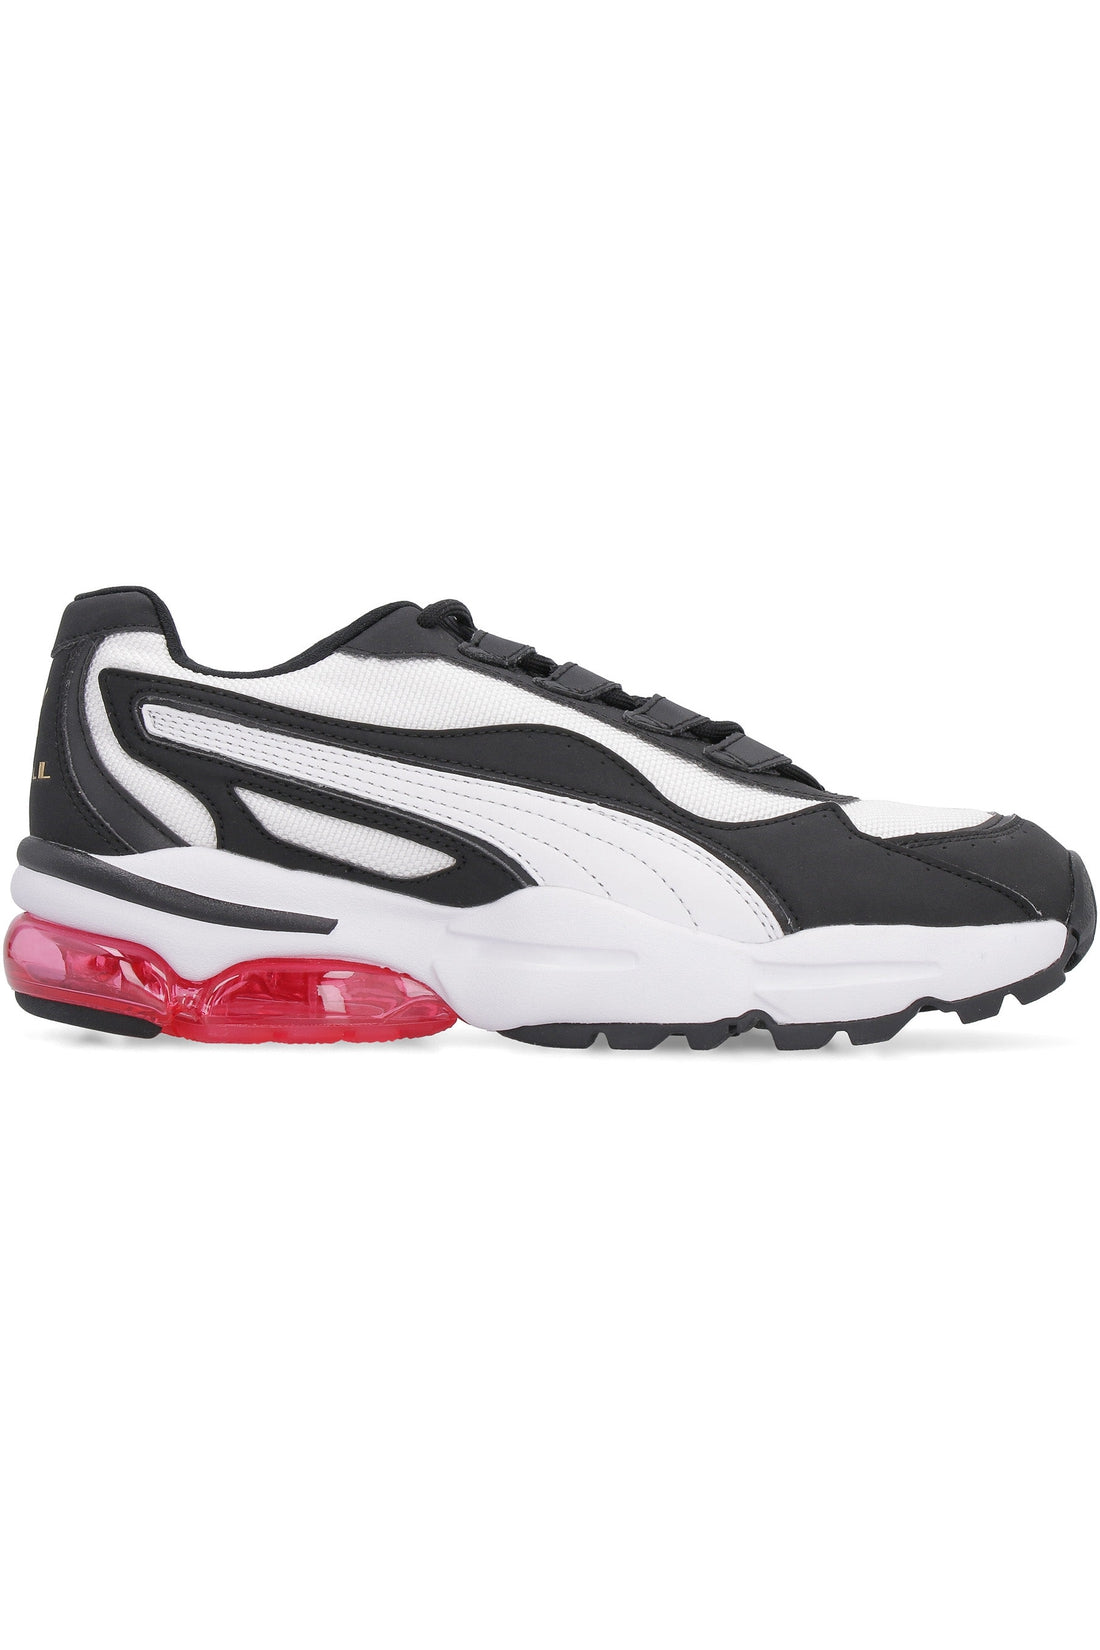 Puma-OUTLET-SALE-Cell Stellar low-top sneakers-ARCHIVIST